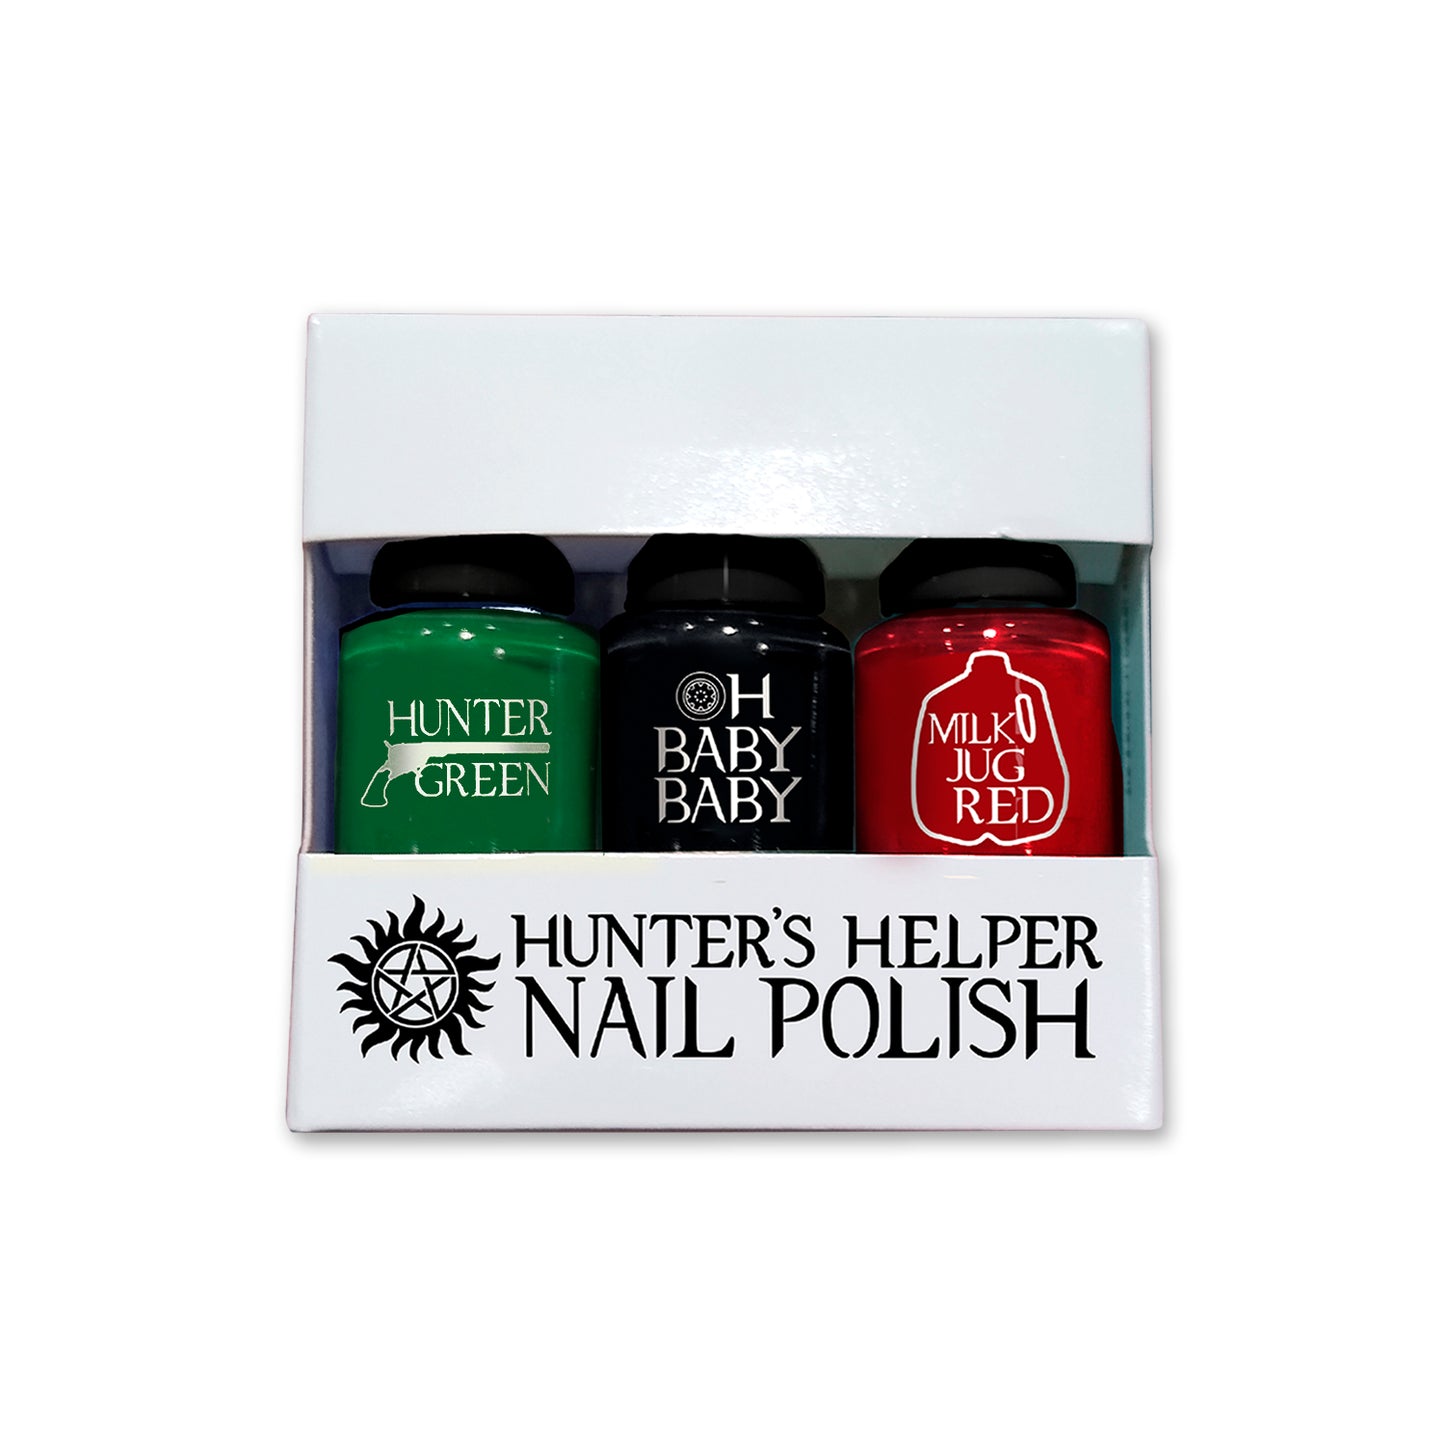 A white, windowed box with the words "Hunter's Helper Nail Polish" and an anti-possession symbol in black. There are 3 cylindrical bottles of nail polish in the box labeled "Good to be queen" (a magenta color), "Don't be an idjit" (olive green), and "Sheriff badge" (metallic gold). 